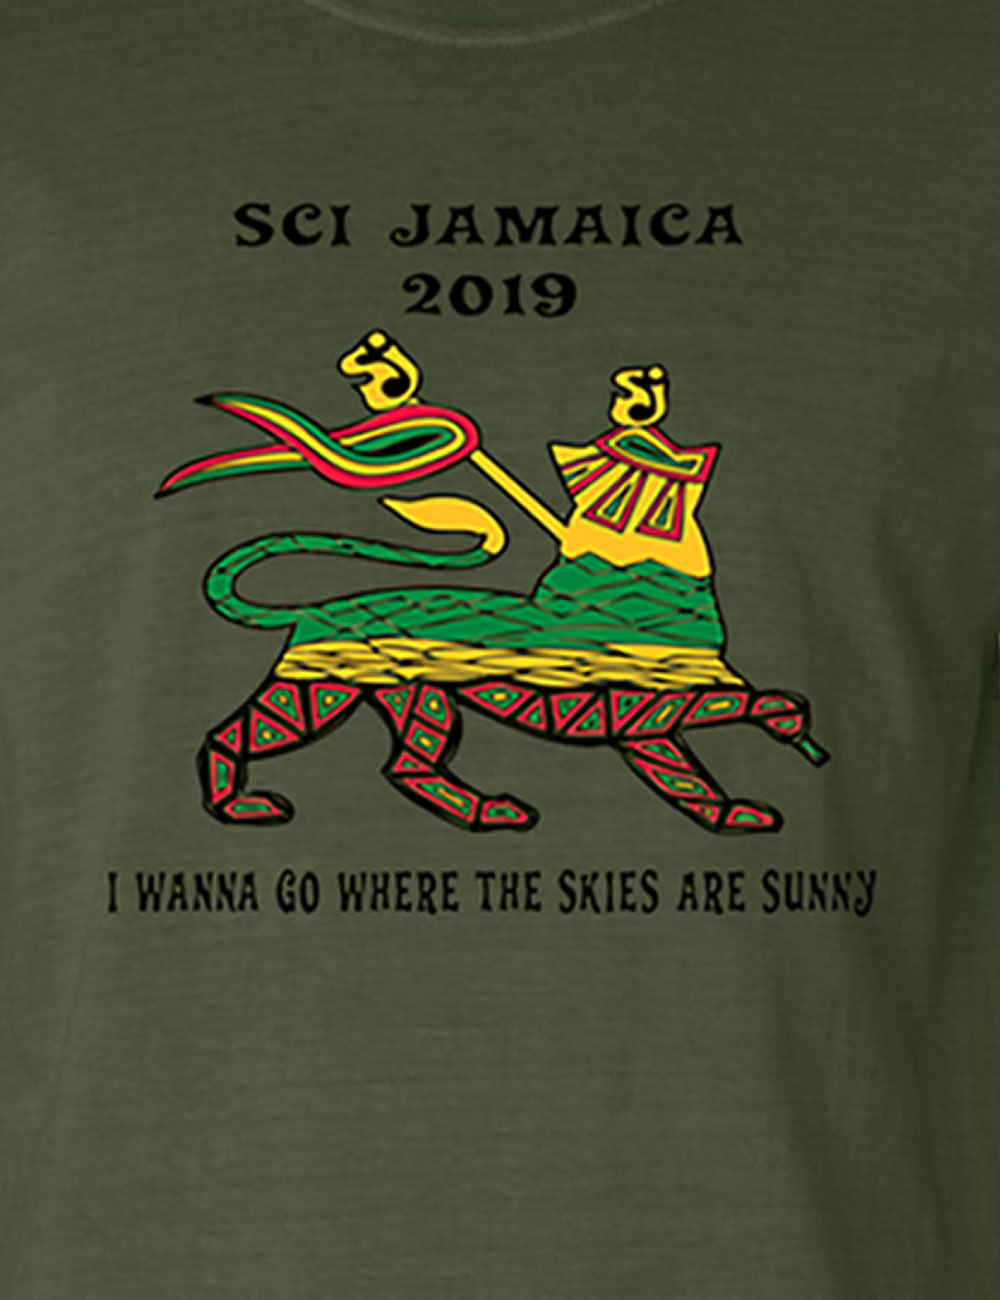 The String Cheese Incident - Merch - Jamaica 2019 Tshirt Close Up